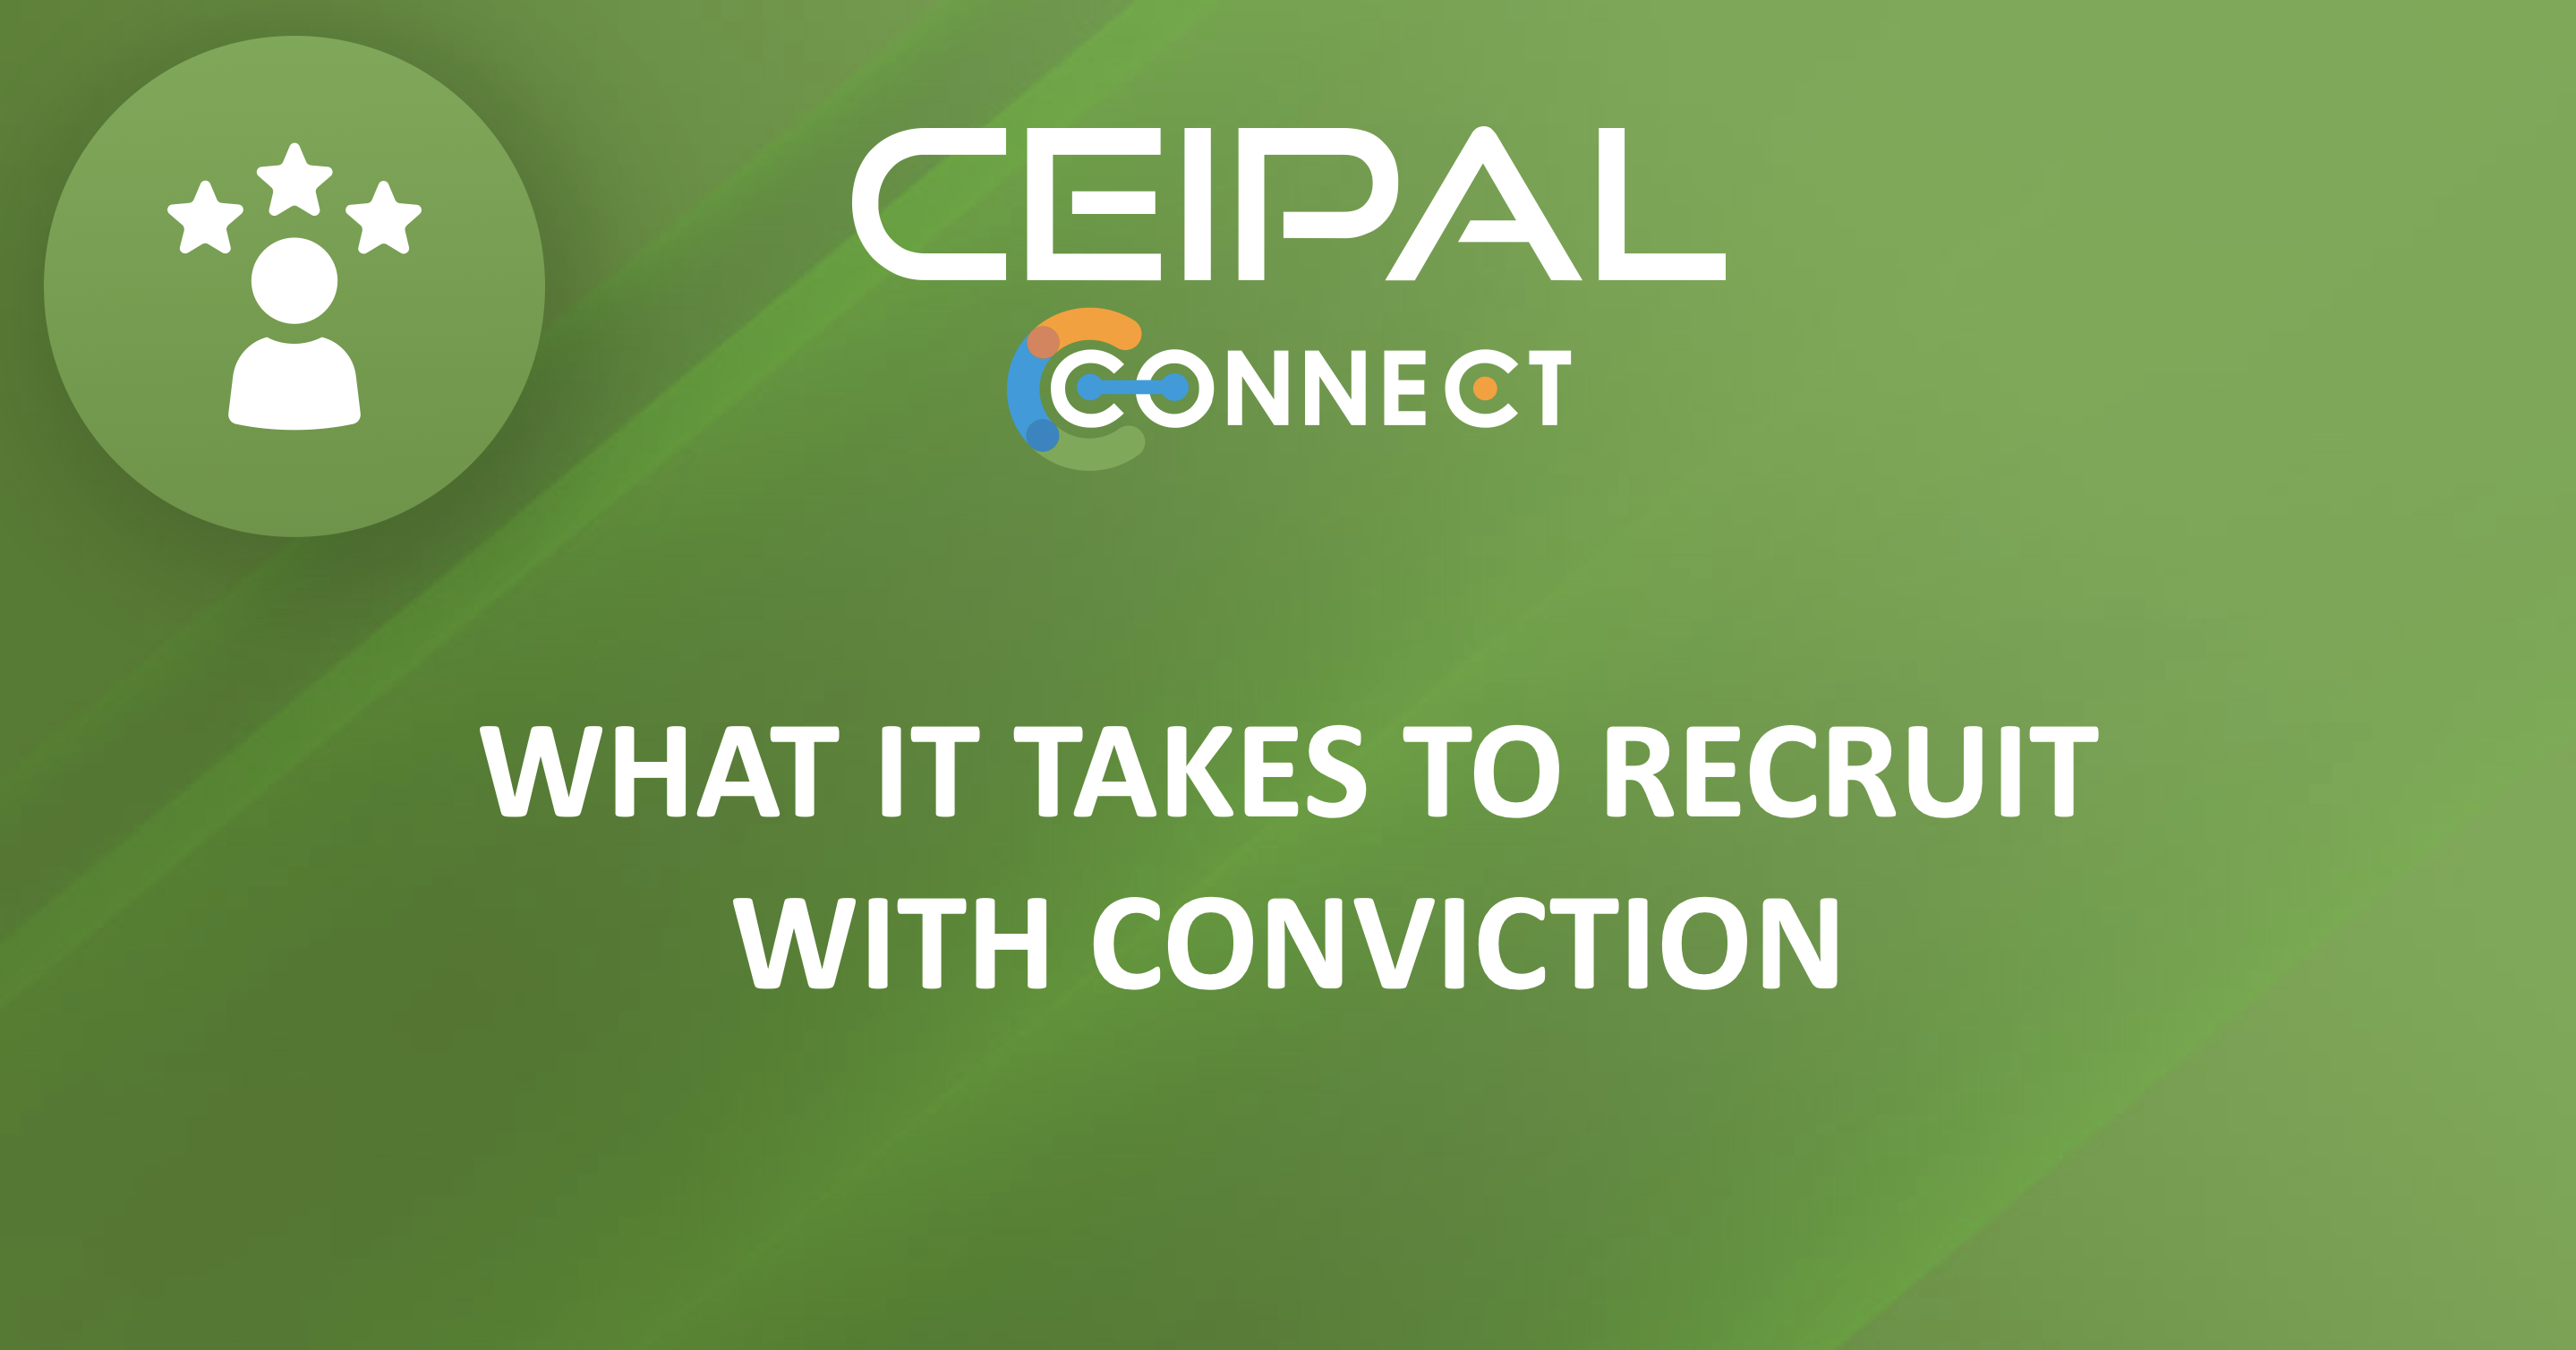 What It Takes to Recruit with Conviction